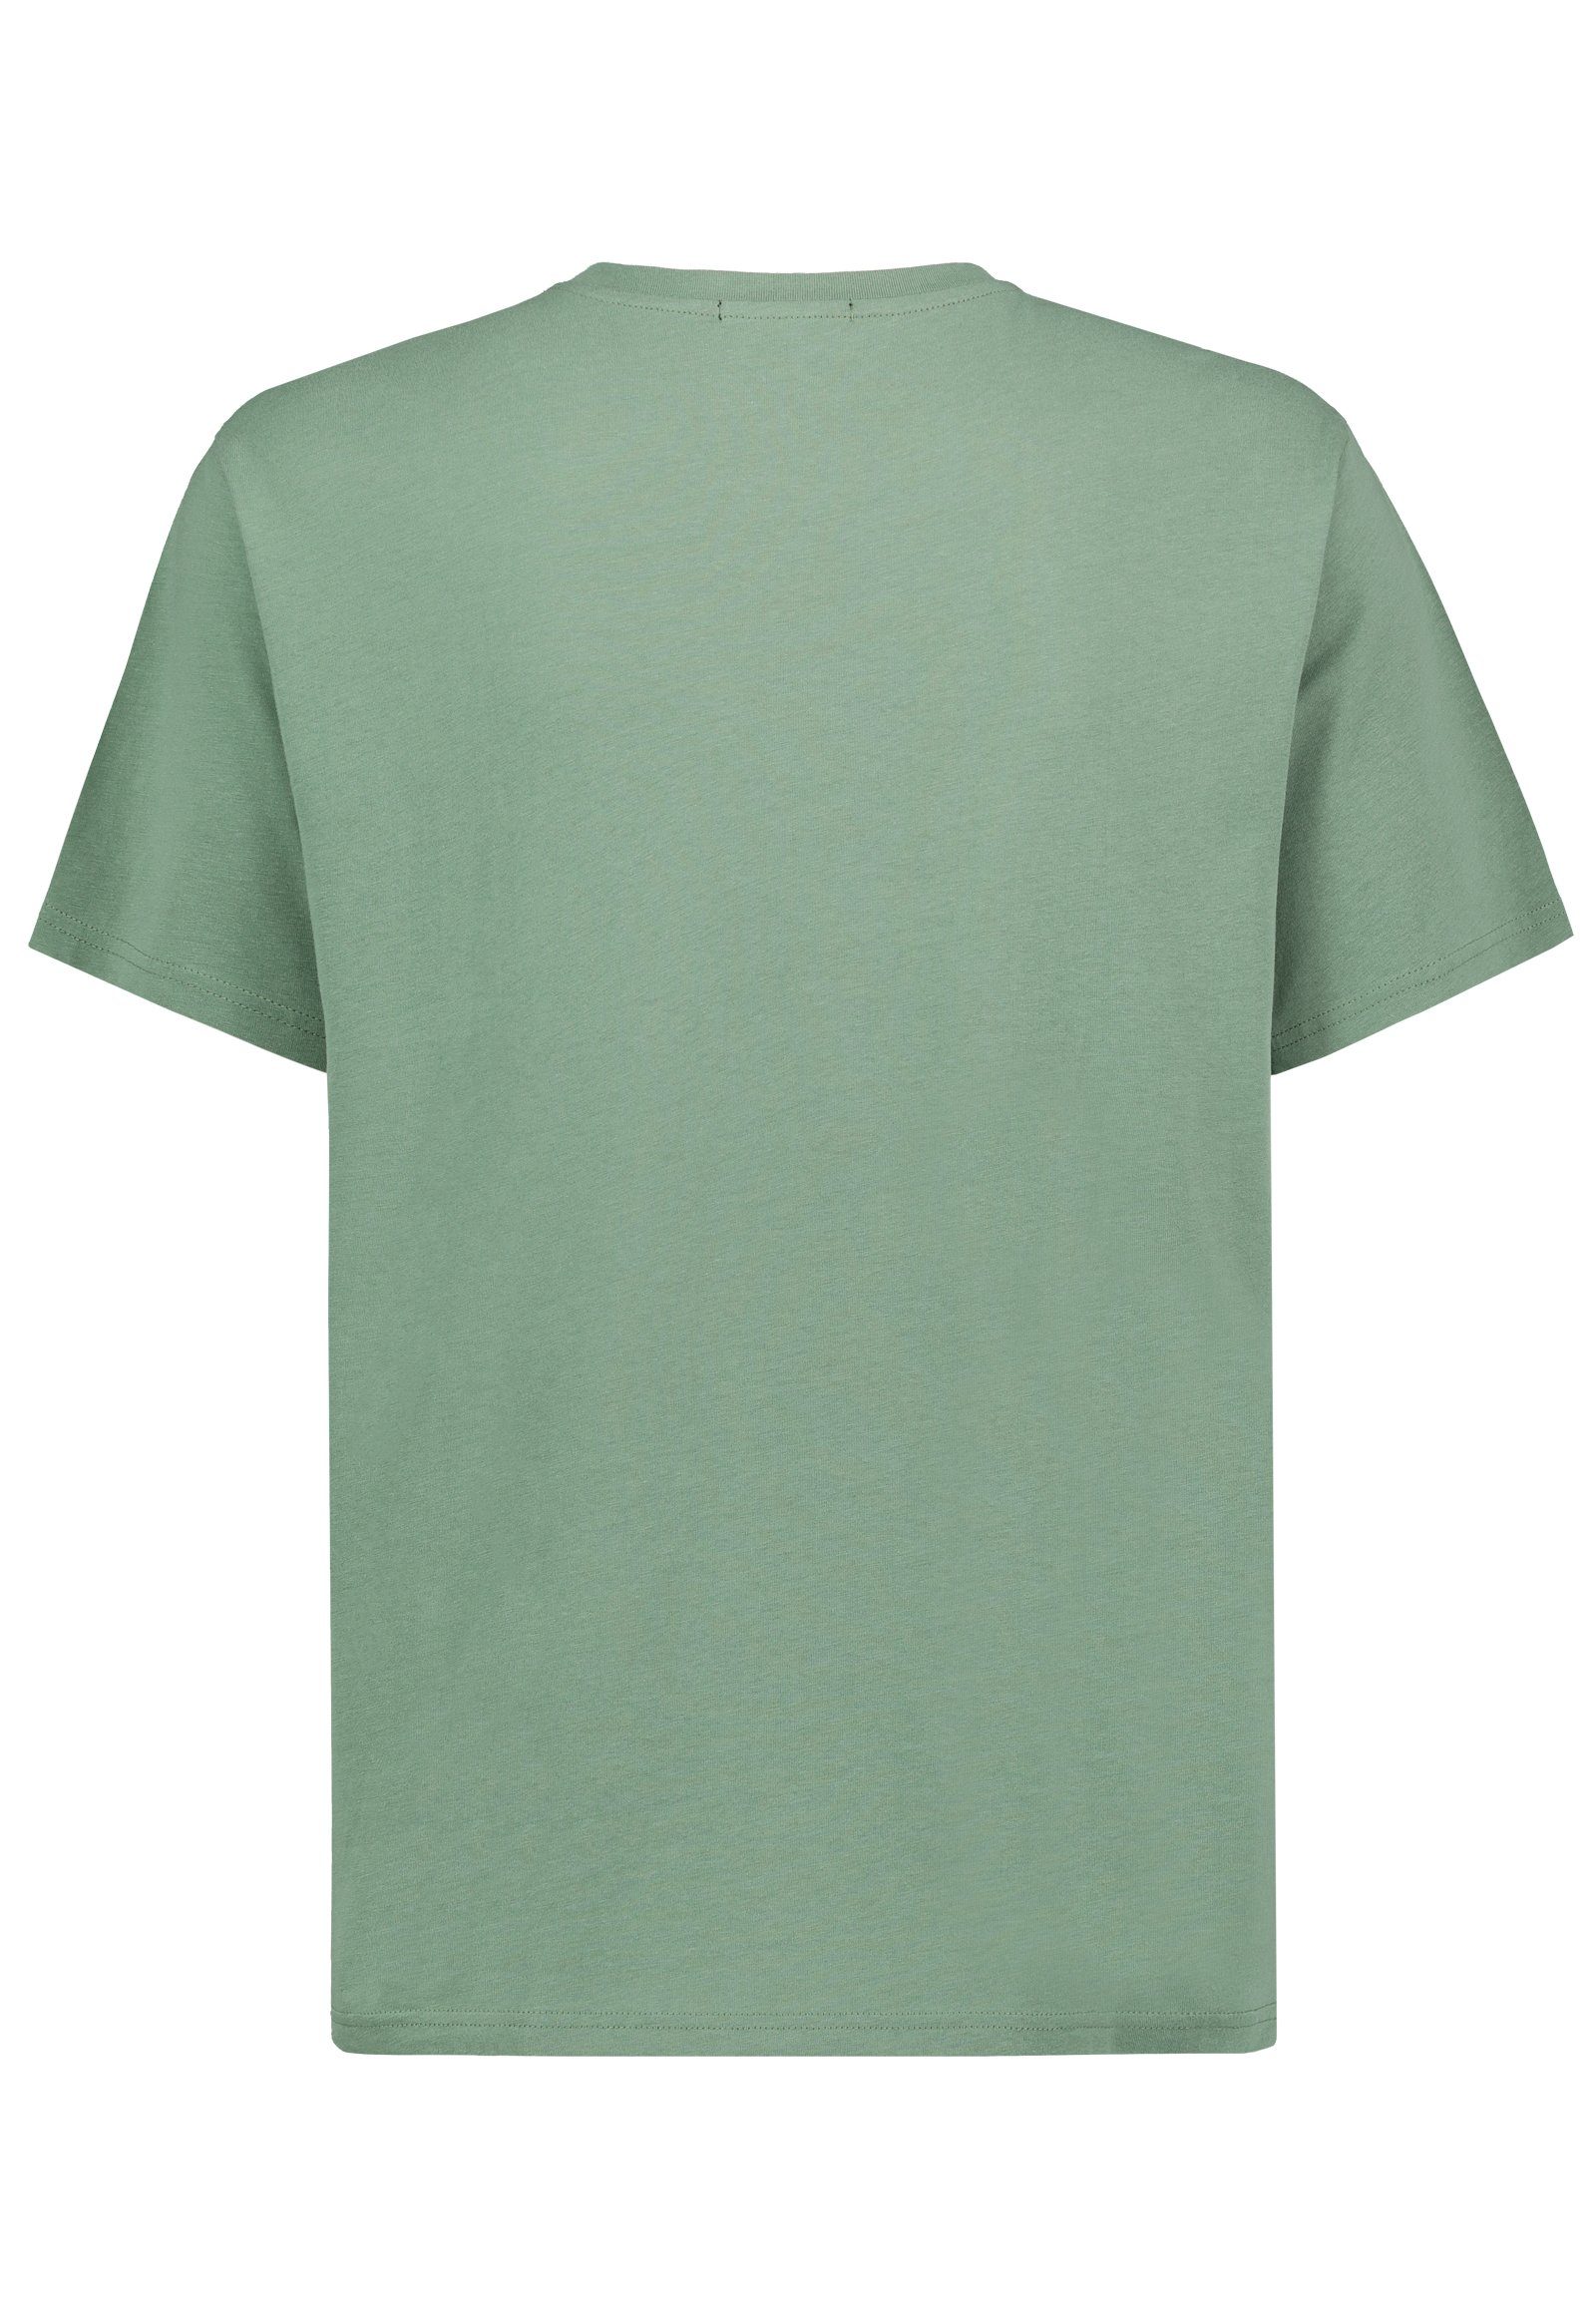 green Print mit T-Shirt SUBLEVEL T-Shirt Sommer